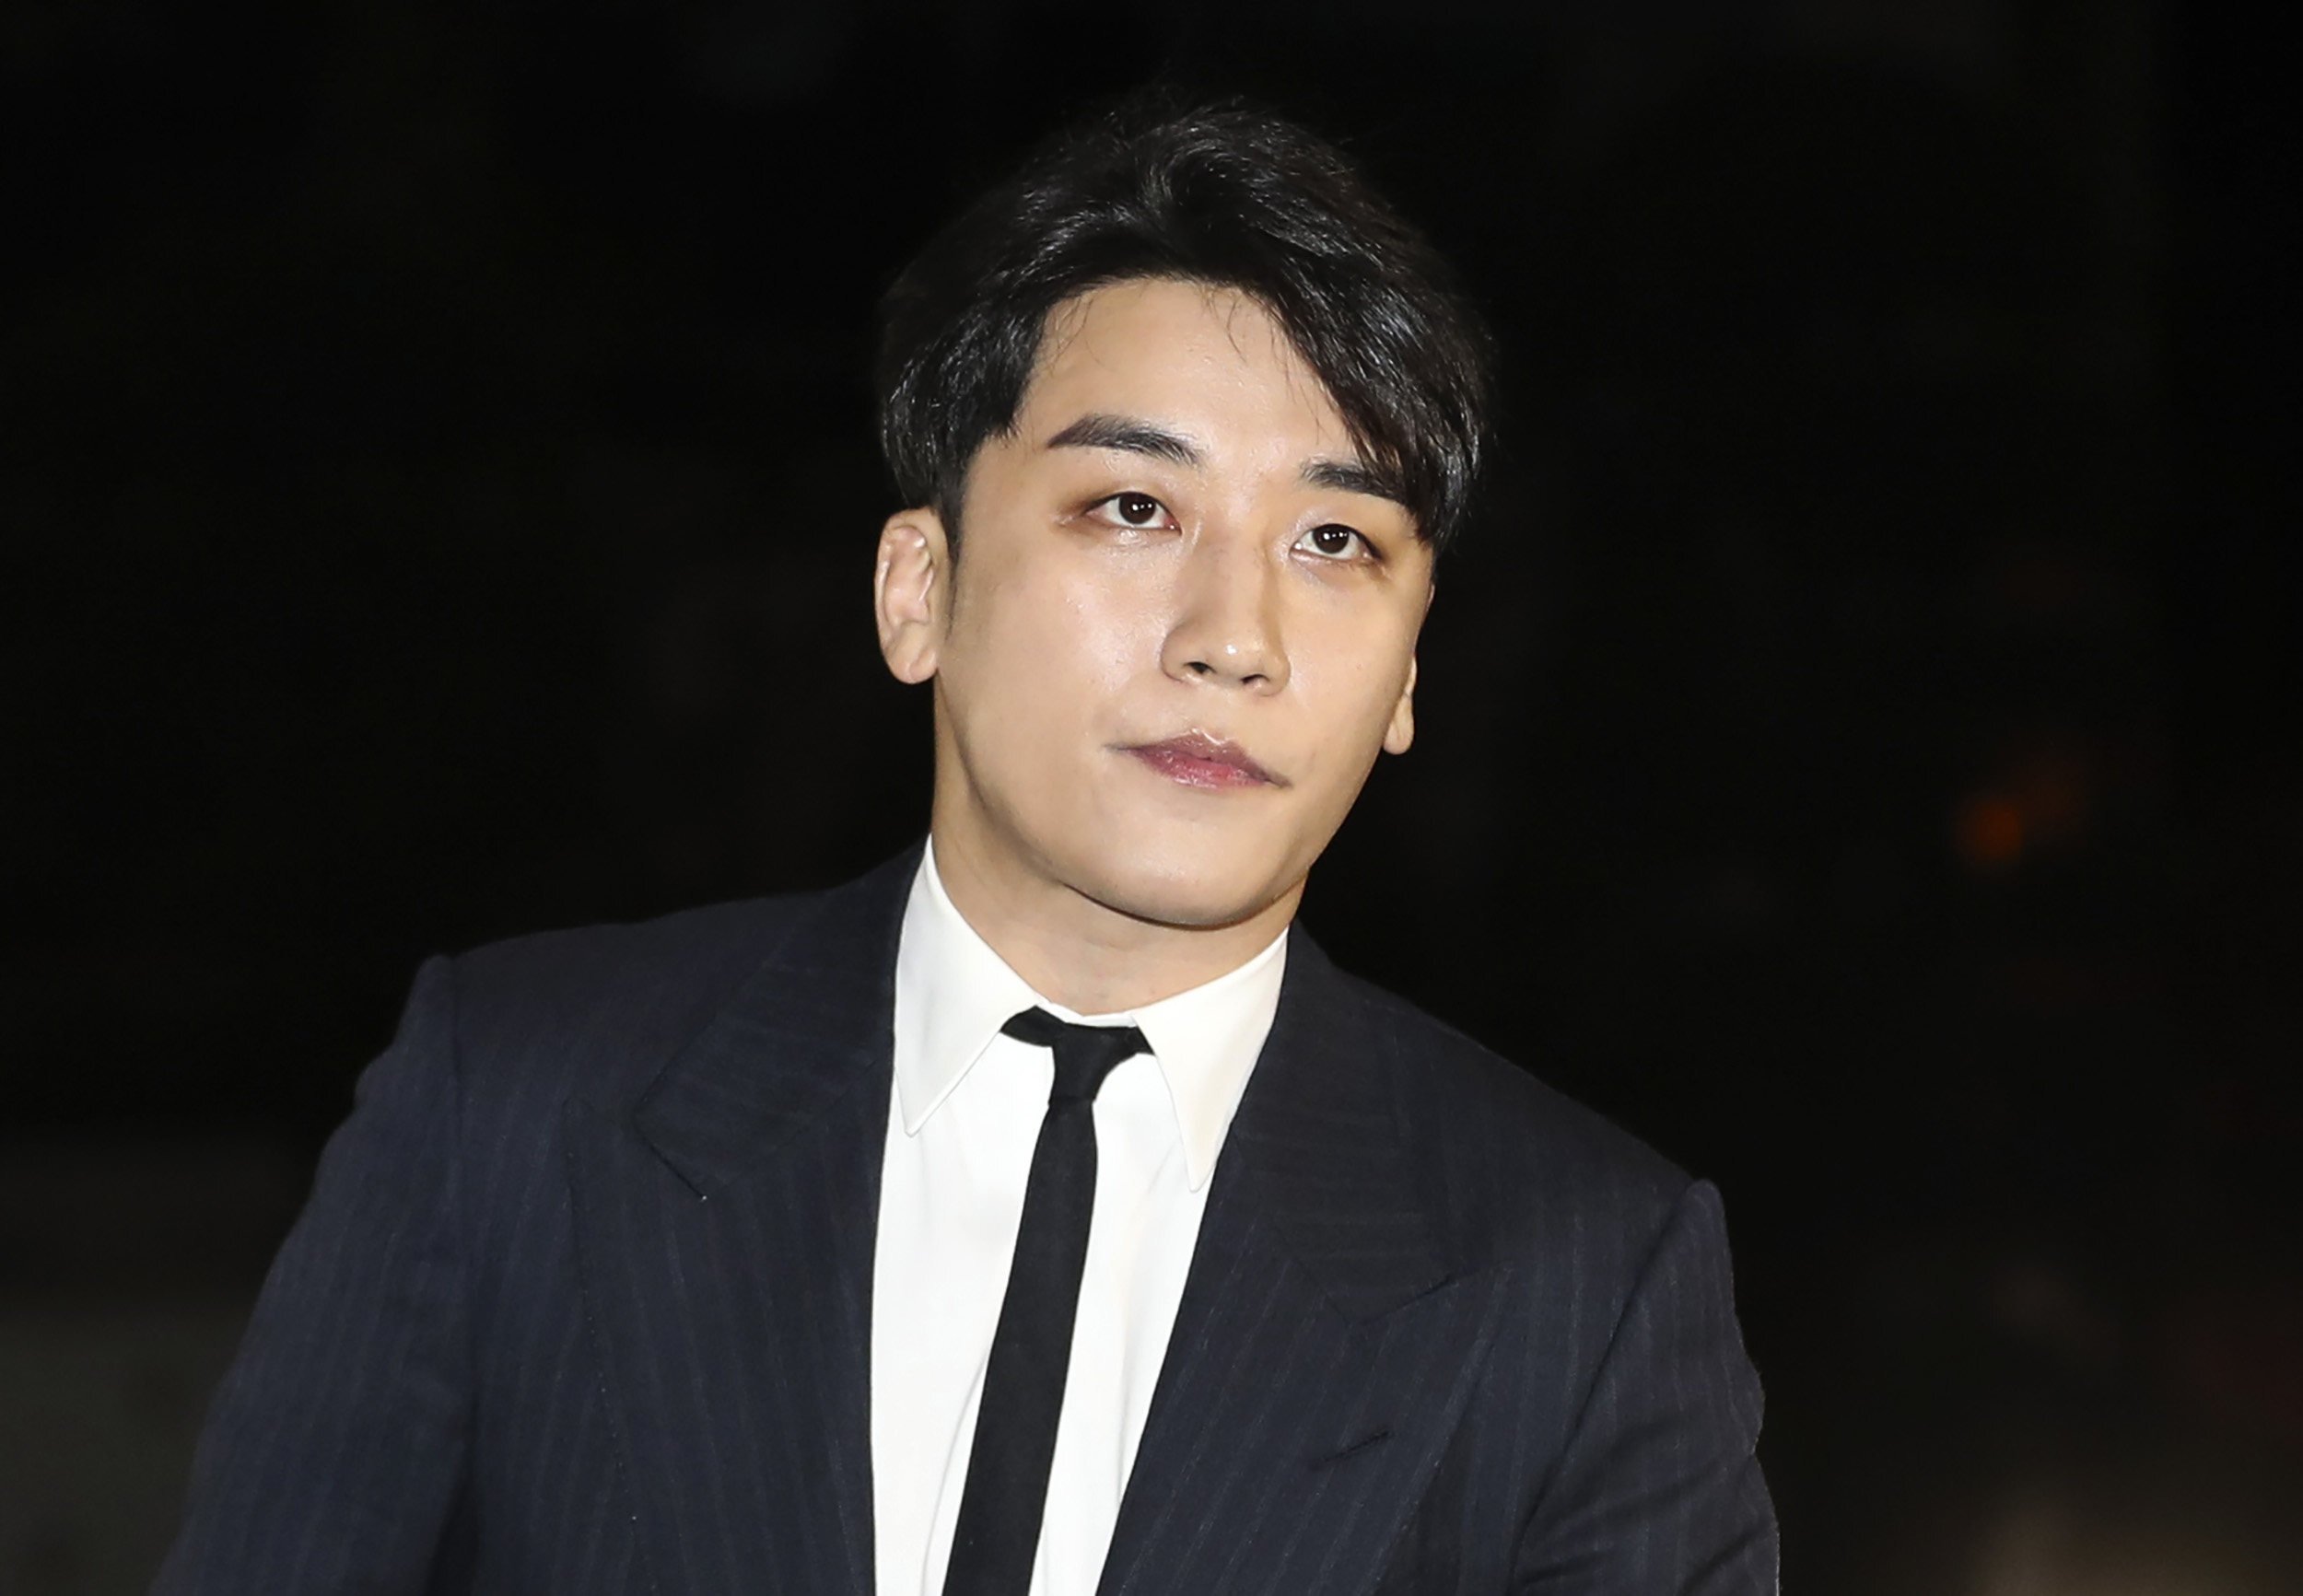 Seungri, a former member of popular K-pop boy group Big Bang, has acknowledged his responsibility for crimes to which he had previously pleaded not guilty, and received a reduced jail term, at an appeal court hearing in South Korea. Photo: Yonhap/AFP